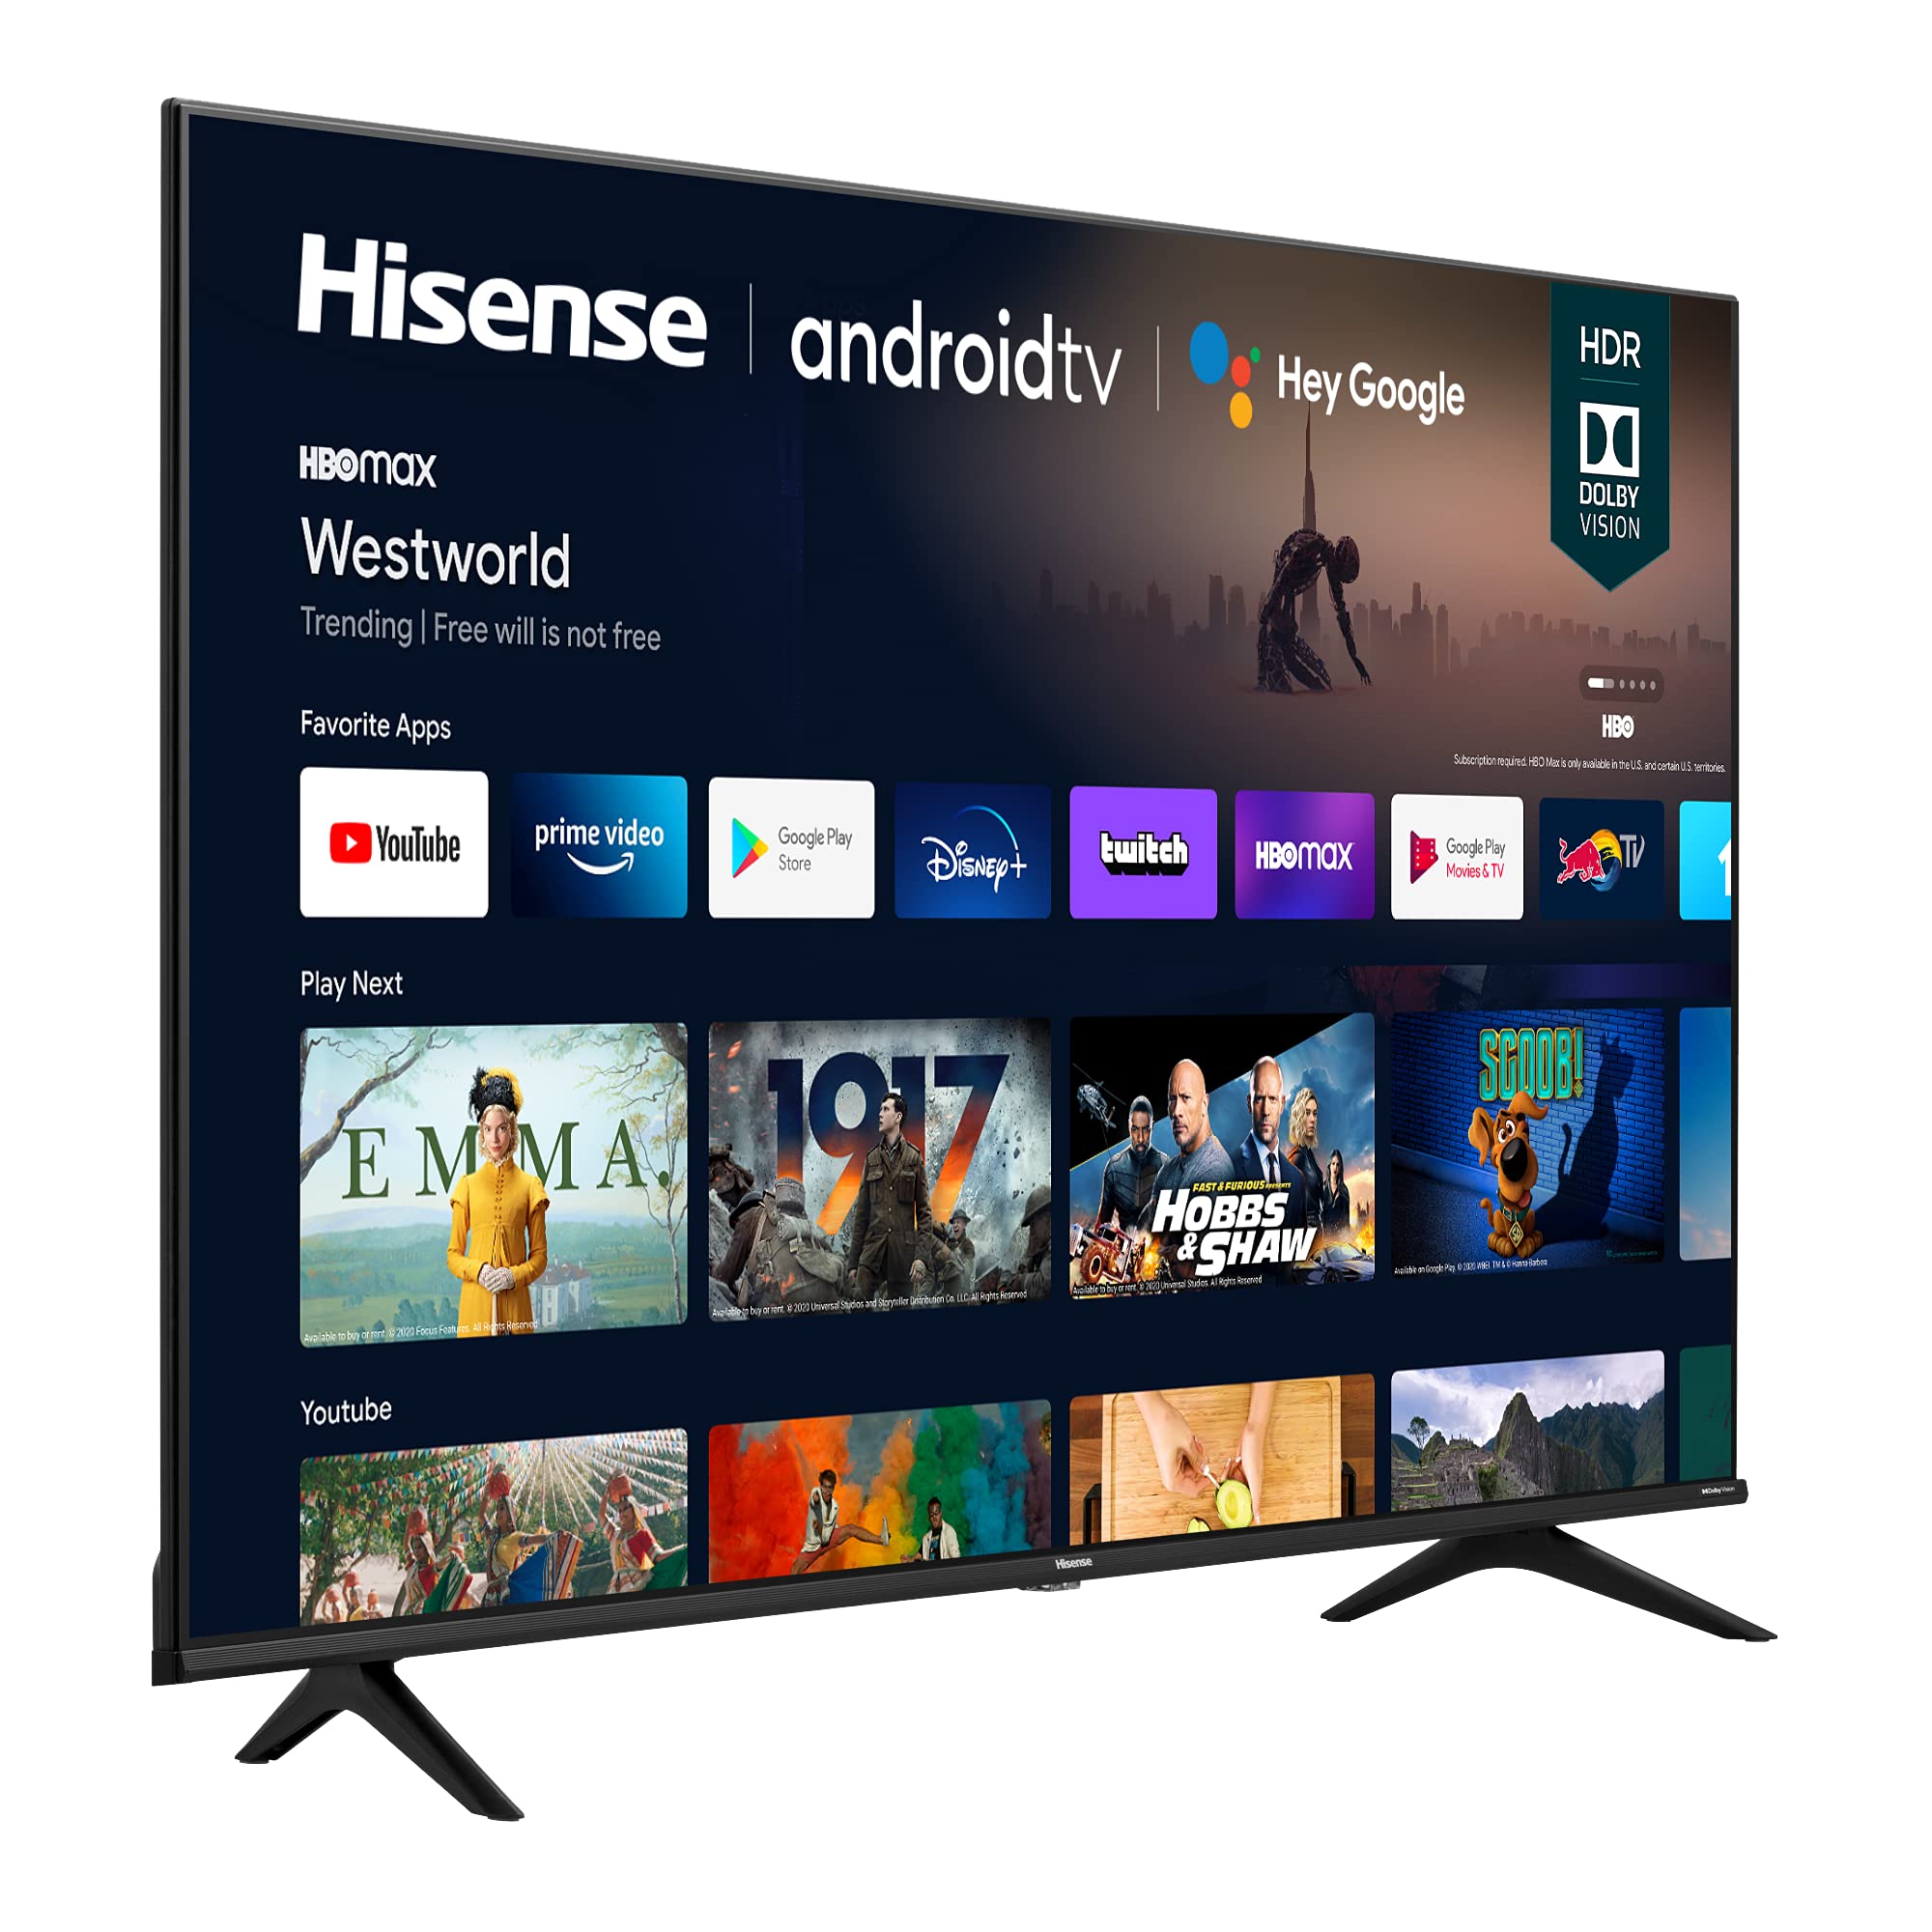 Hisense 50A6G 50-Inch 4K Ultra HD Android Smart TV with Alexa Compatibility (2021 Model)